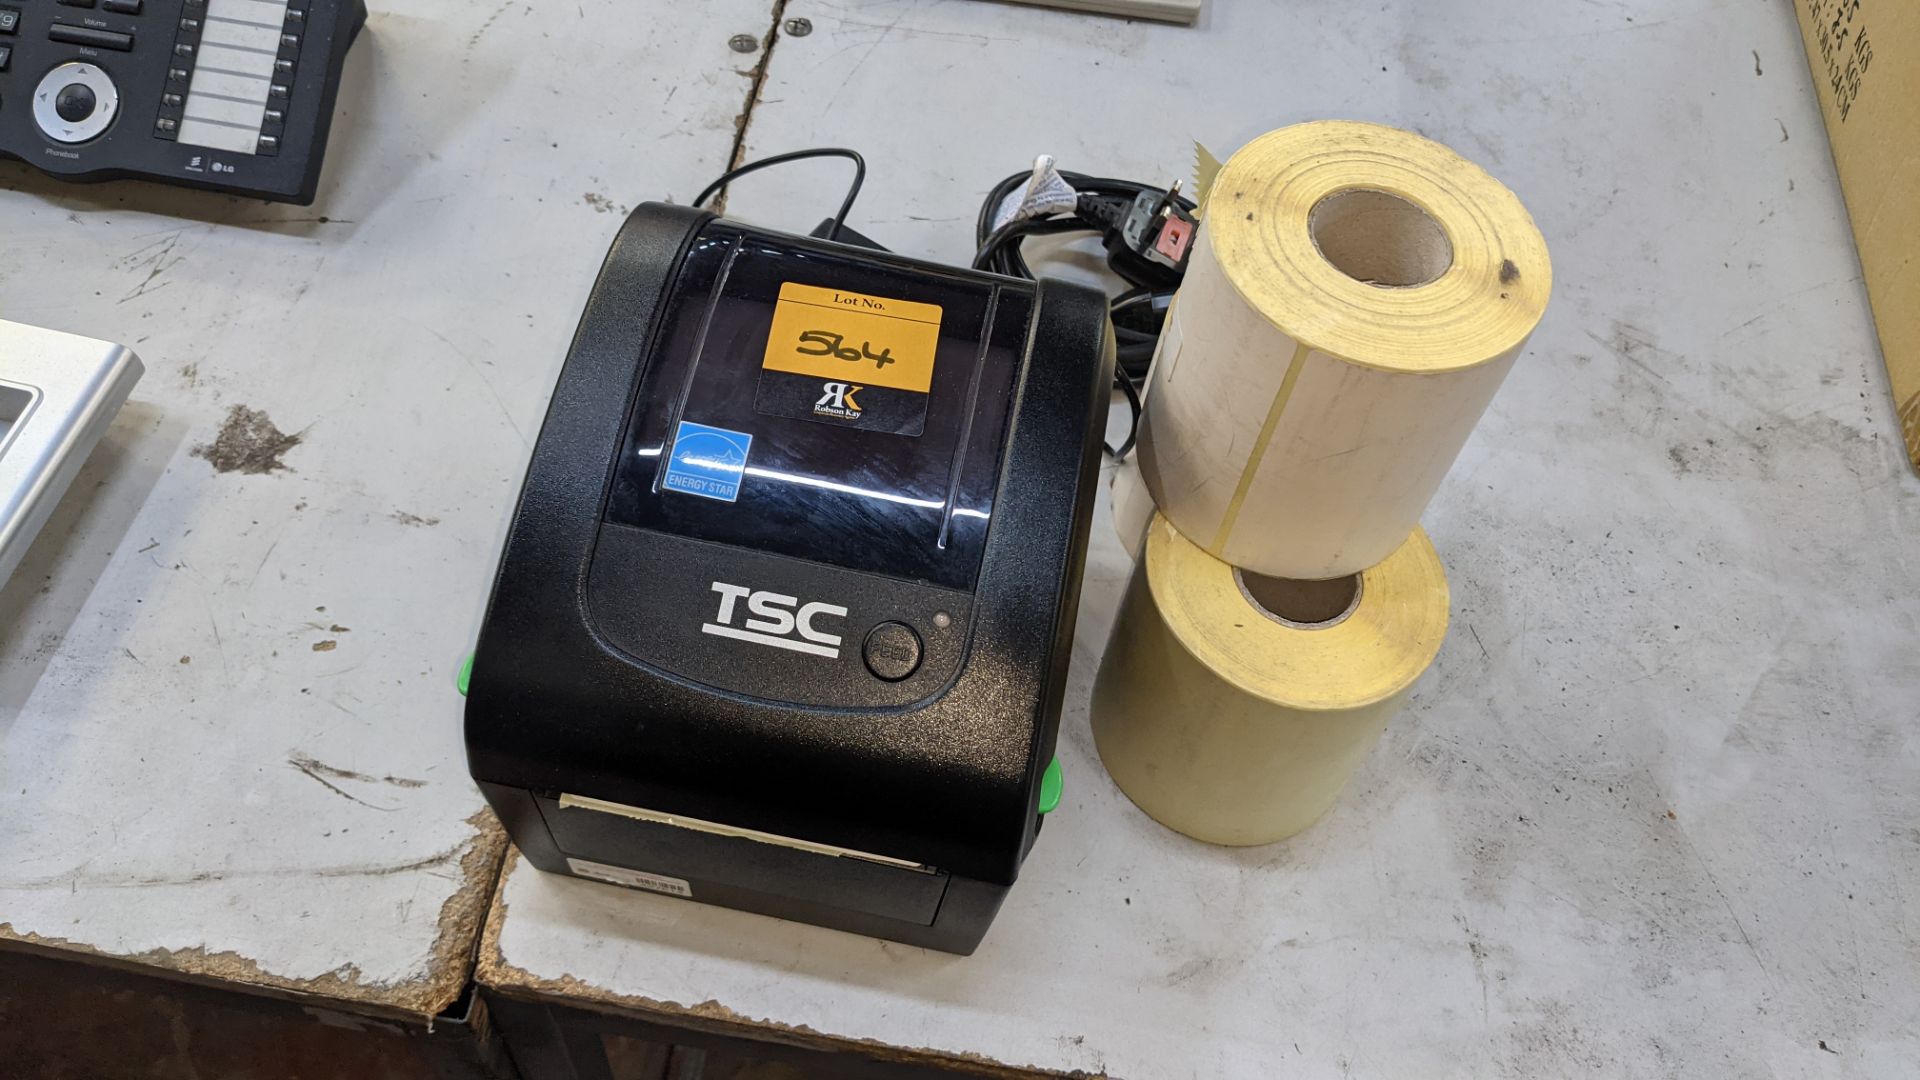 TSC label printer, model DA210 with power pack & reels of spare labels